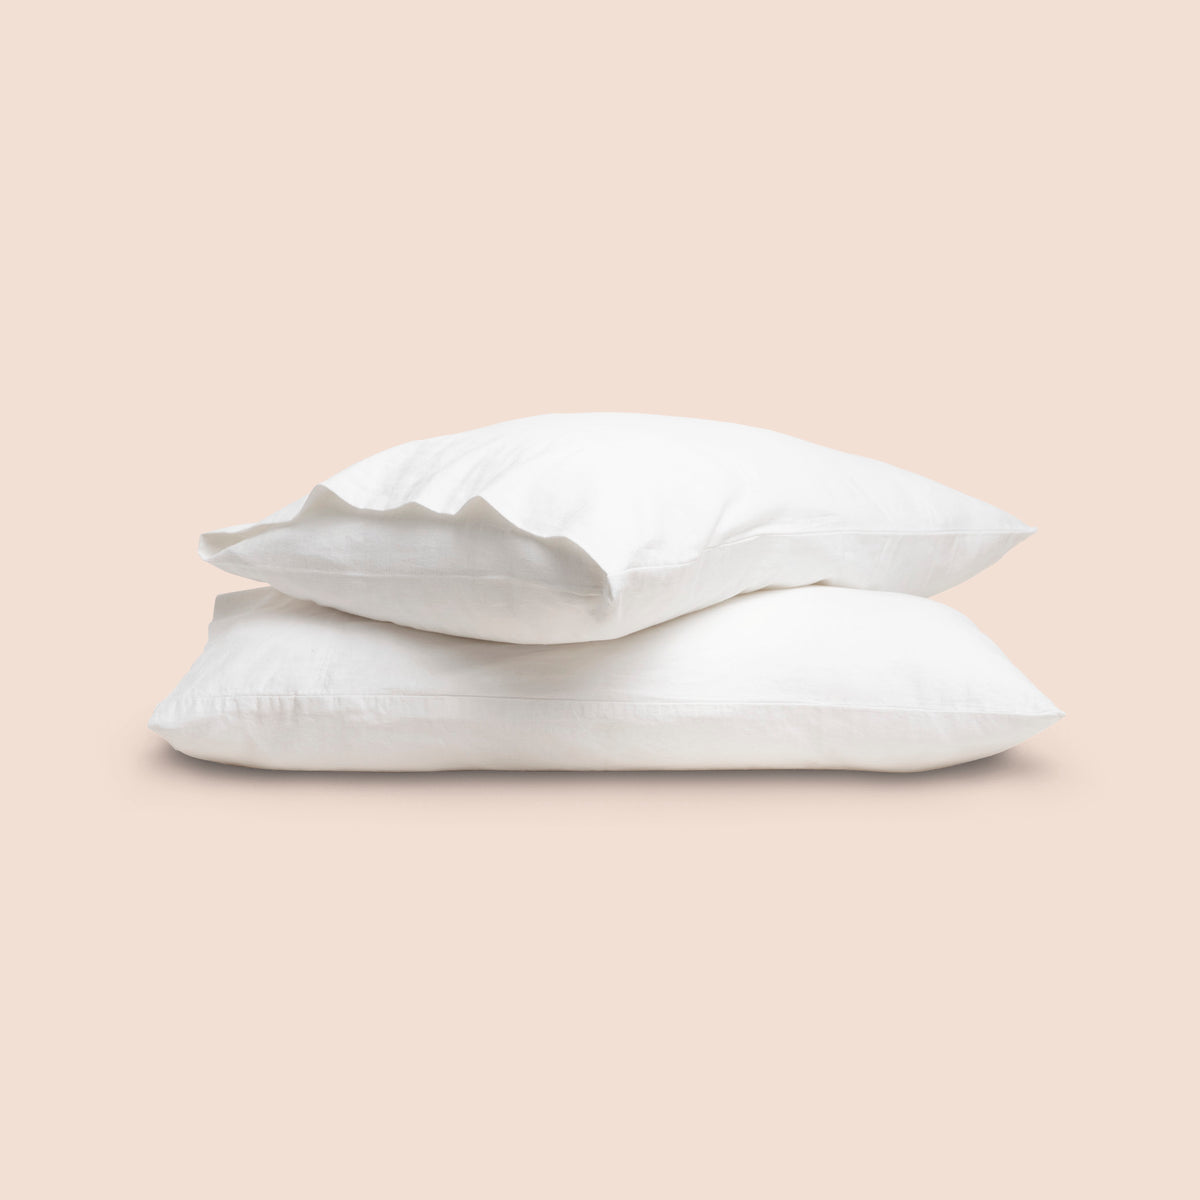 Image of two pillows with White Blended Linen Pillowcases stacked on top of each other on a light pink background. The top pillow is showcasing an enveloping feature. 